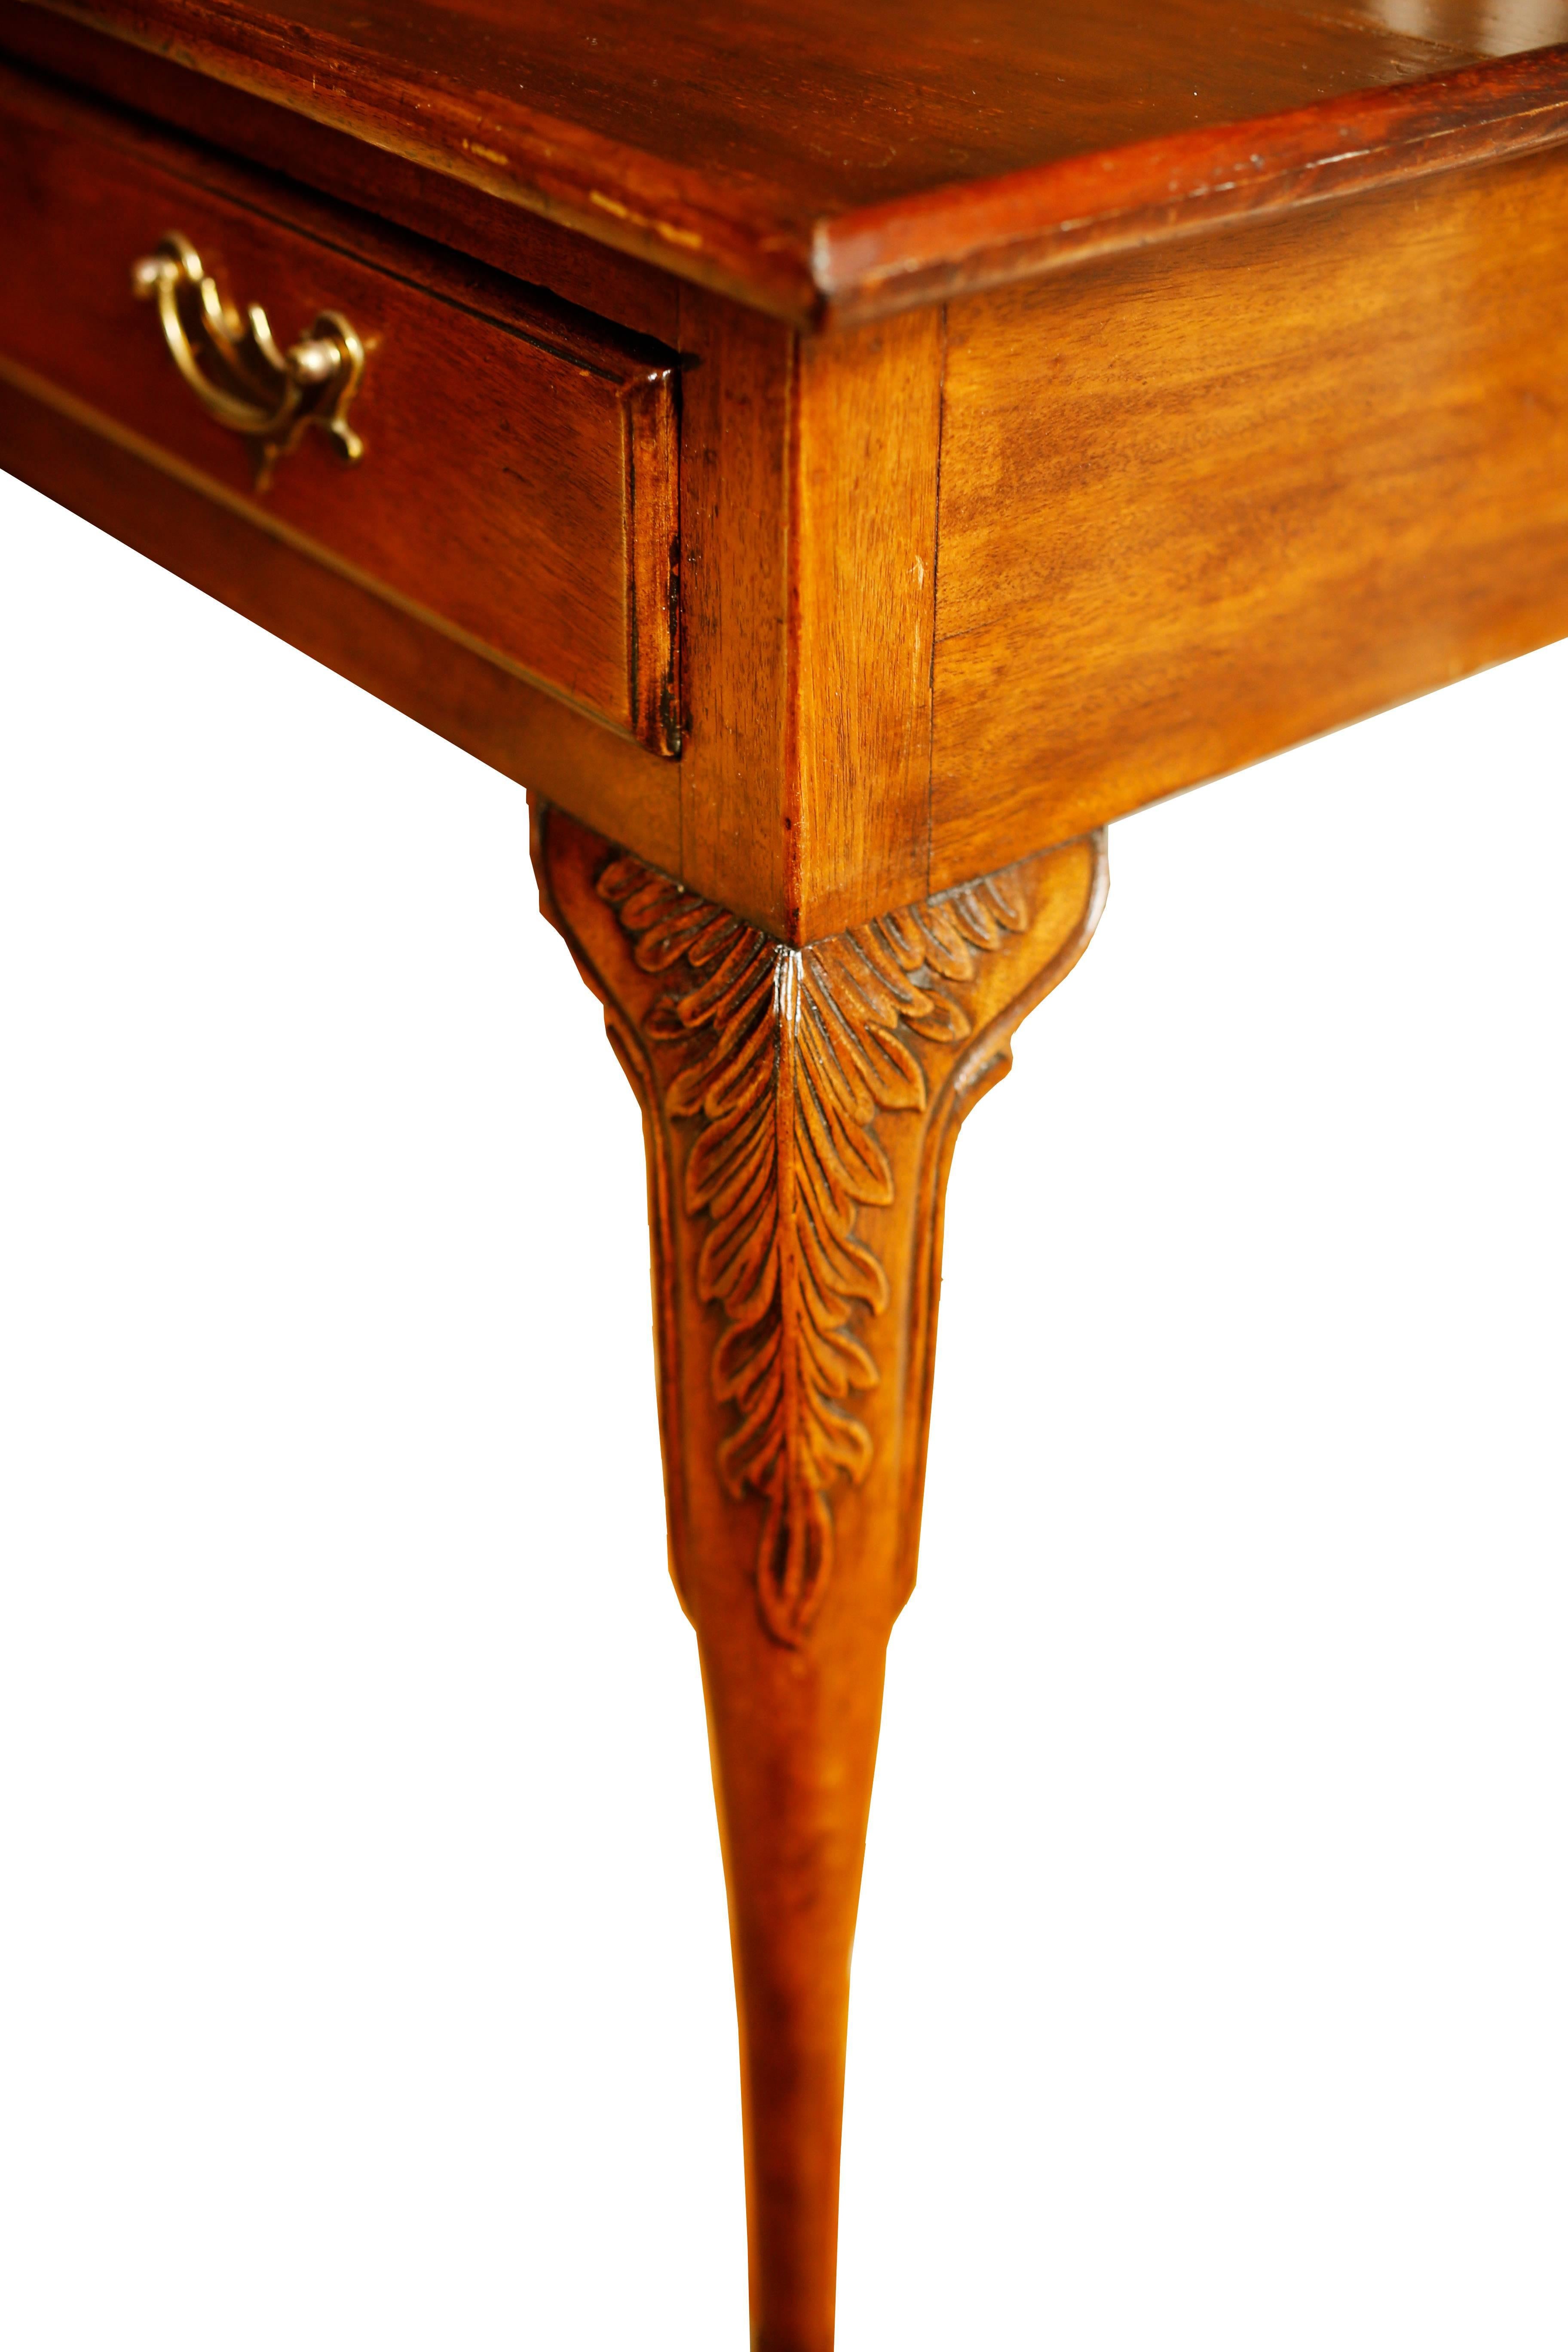 Gorgeous mahogany George II mahogany tea or silver table with tray top and frieze drawer. The slender elegant cabriole legs bear acanthus knee carving and terminate in delicate trifid feet, Ireland, circa 1760.